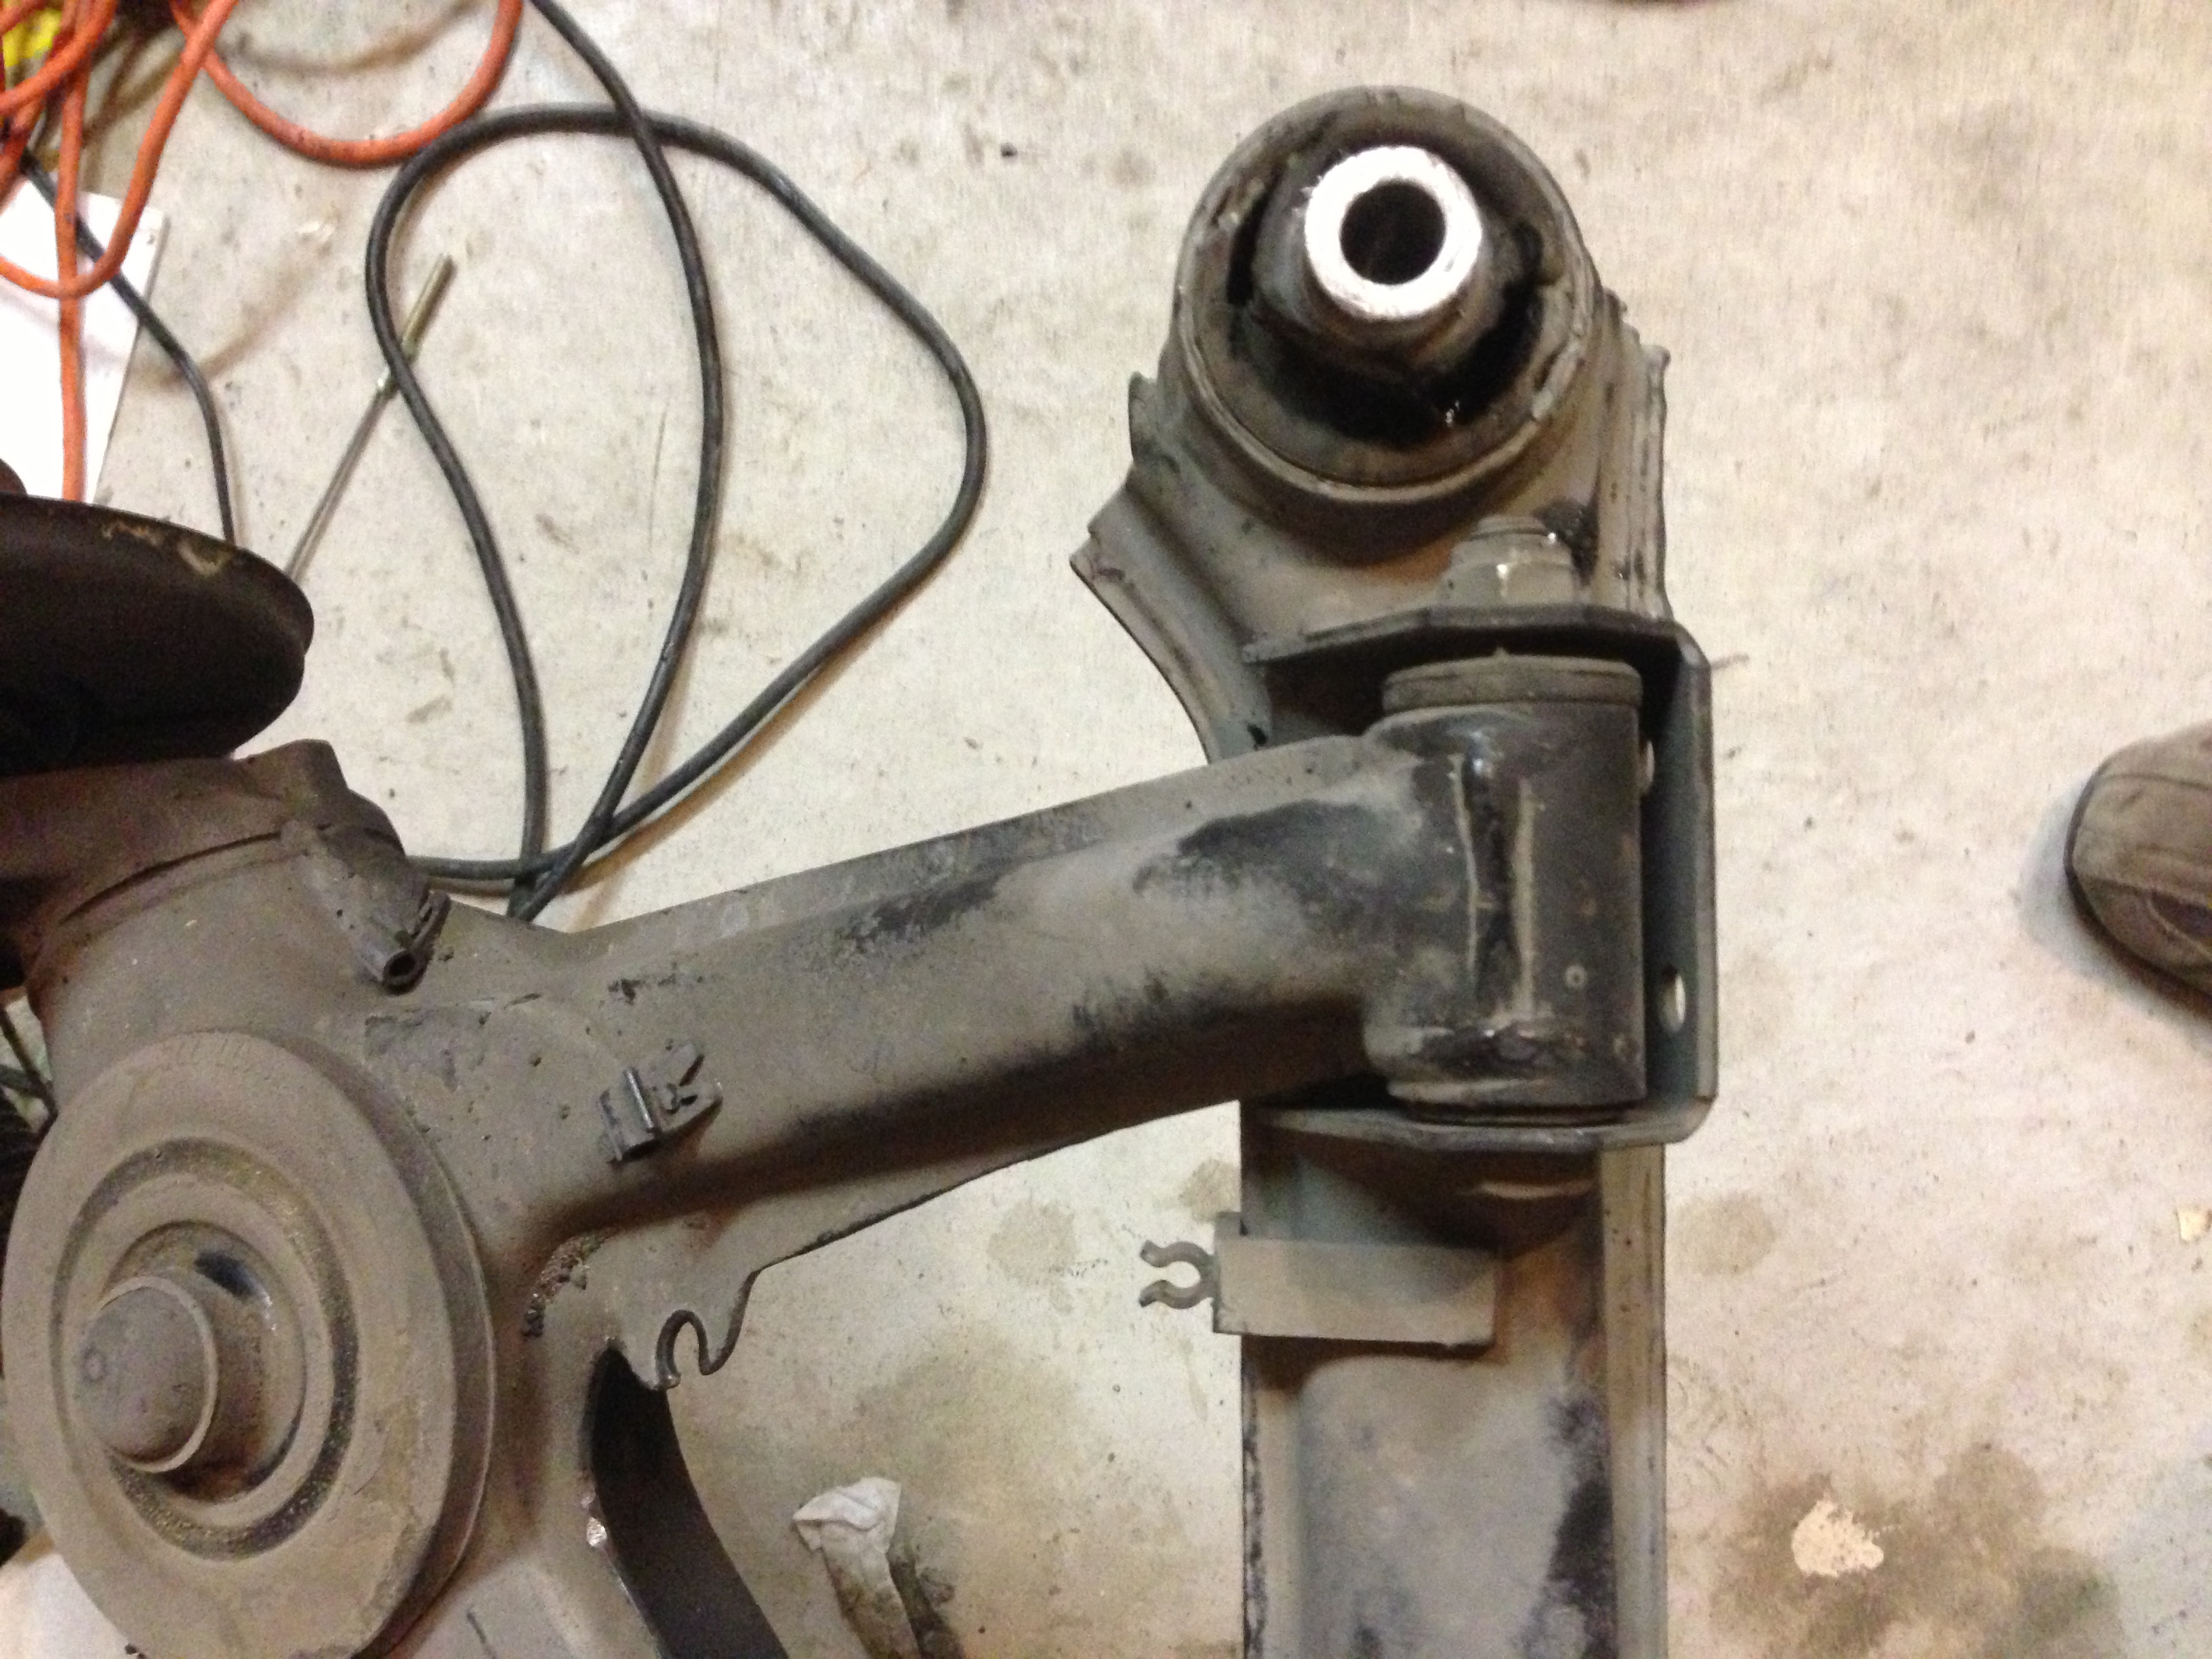 E30 Subframe removal - trailing arm mount